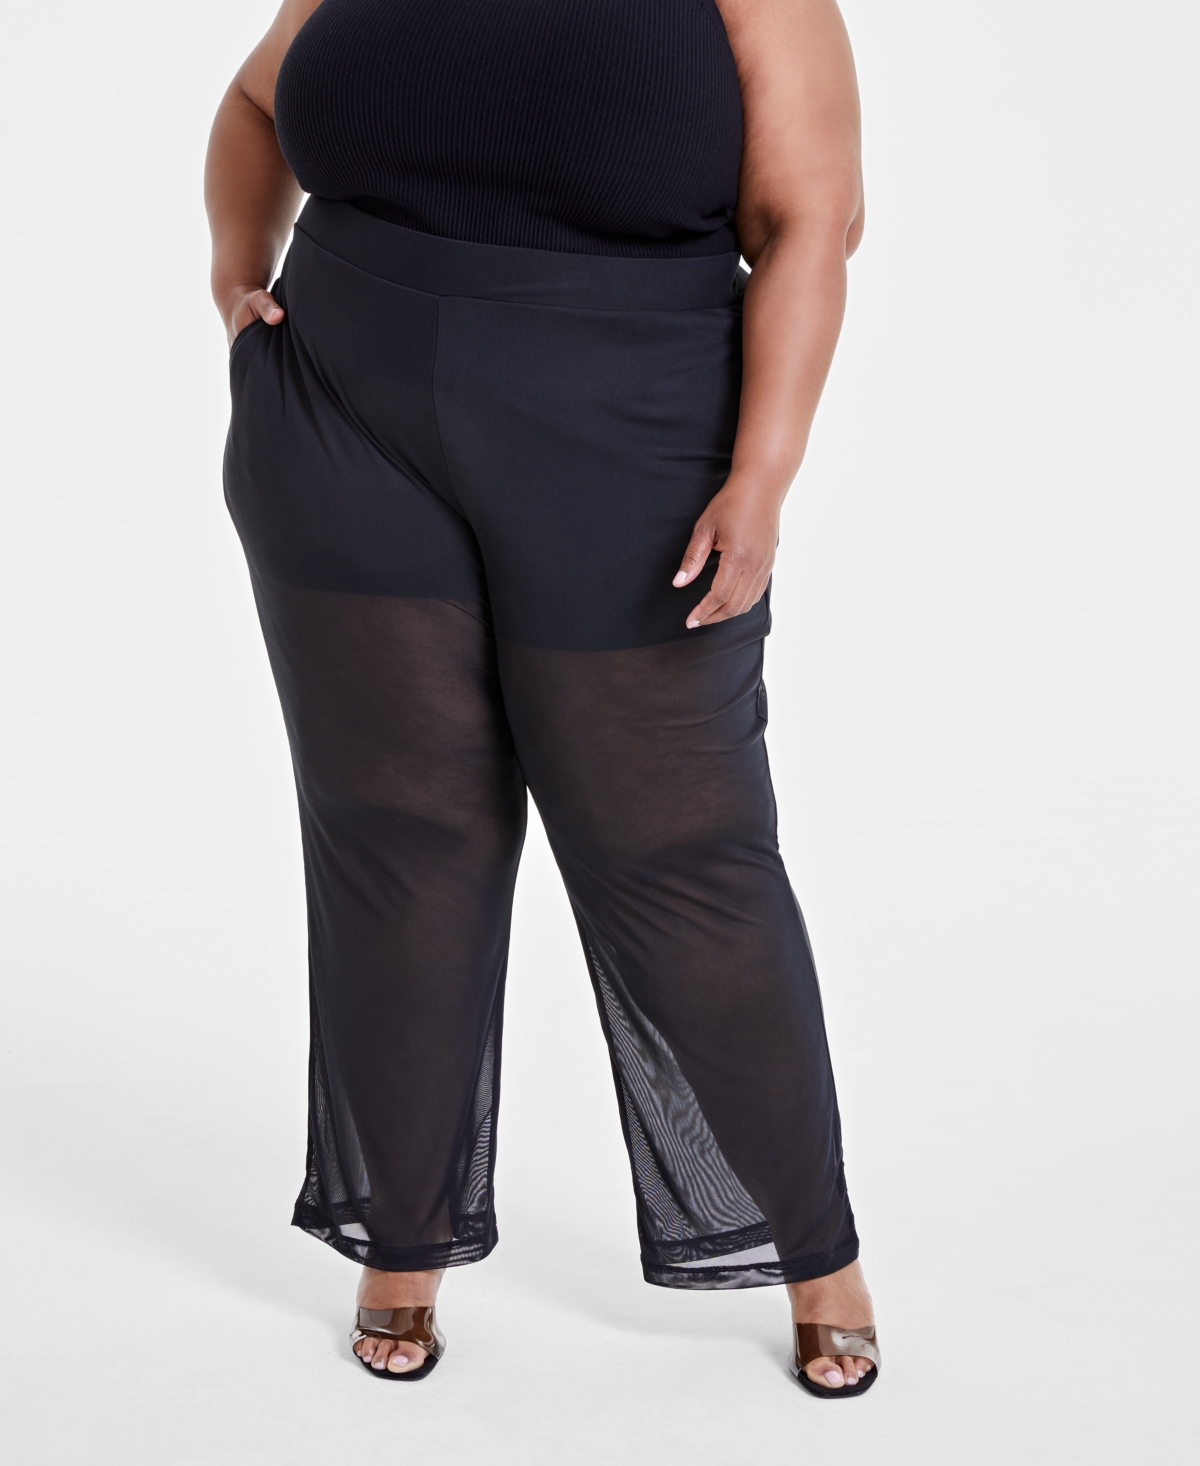 Trendy Plus Size Printed Mesh Pants, Created for Macy's - Blk Beauty